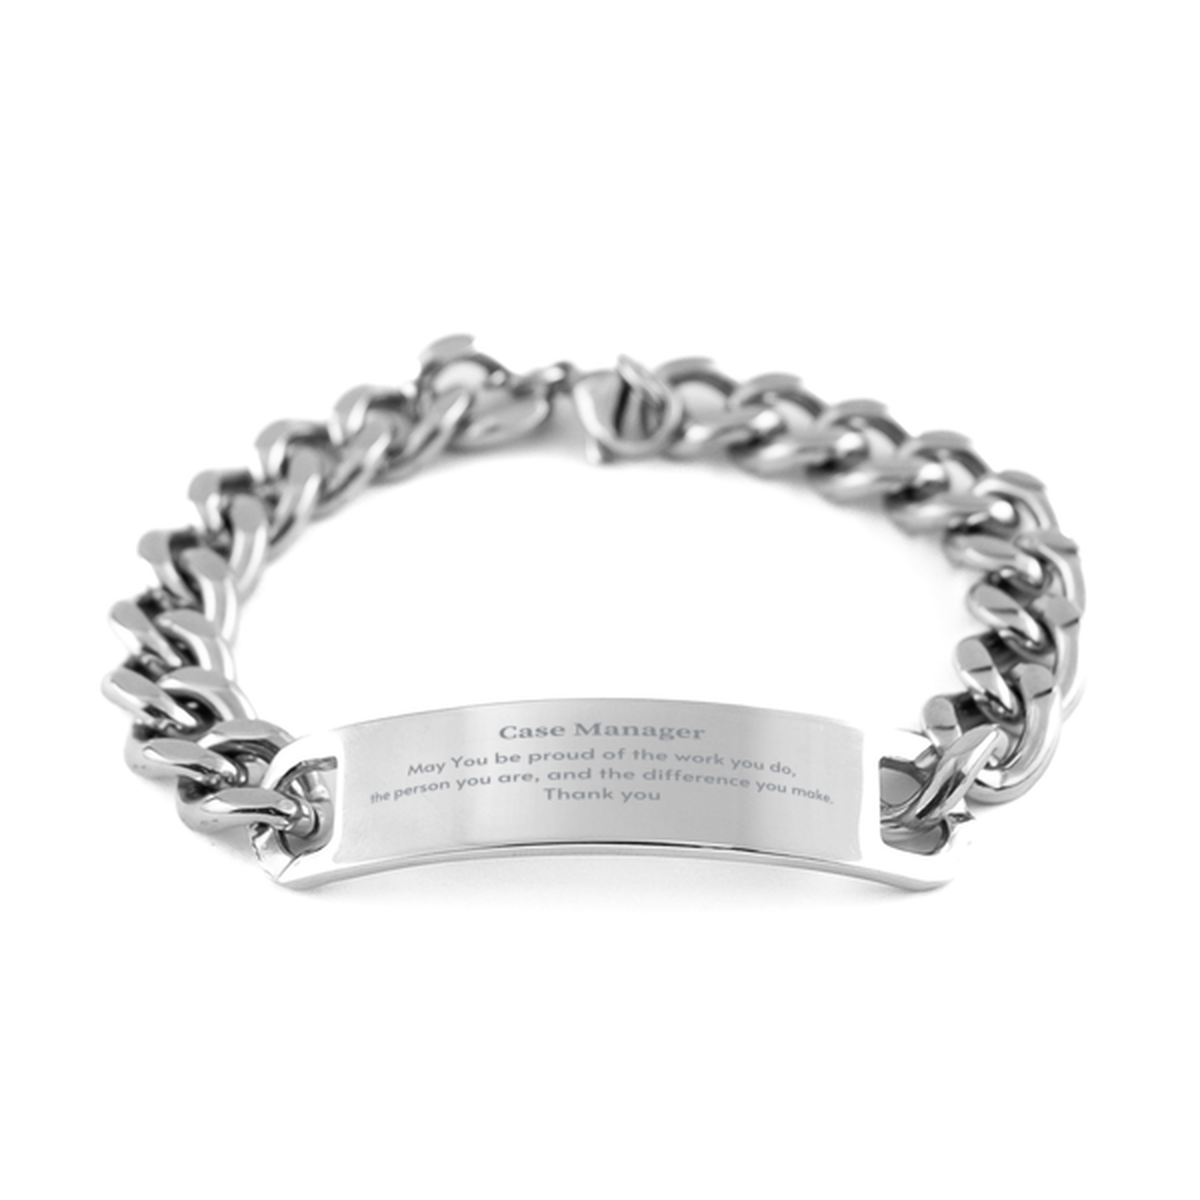 Heartwarming Cuban Chain Stainless Steel Bracelet Retirement Coworkers Gifts for Case Manager, Case Manager May You be proud of the work you do, the person you are Gifts for Boss Men Women Friends